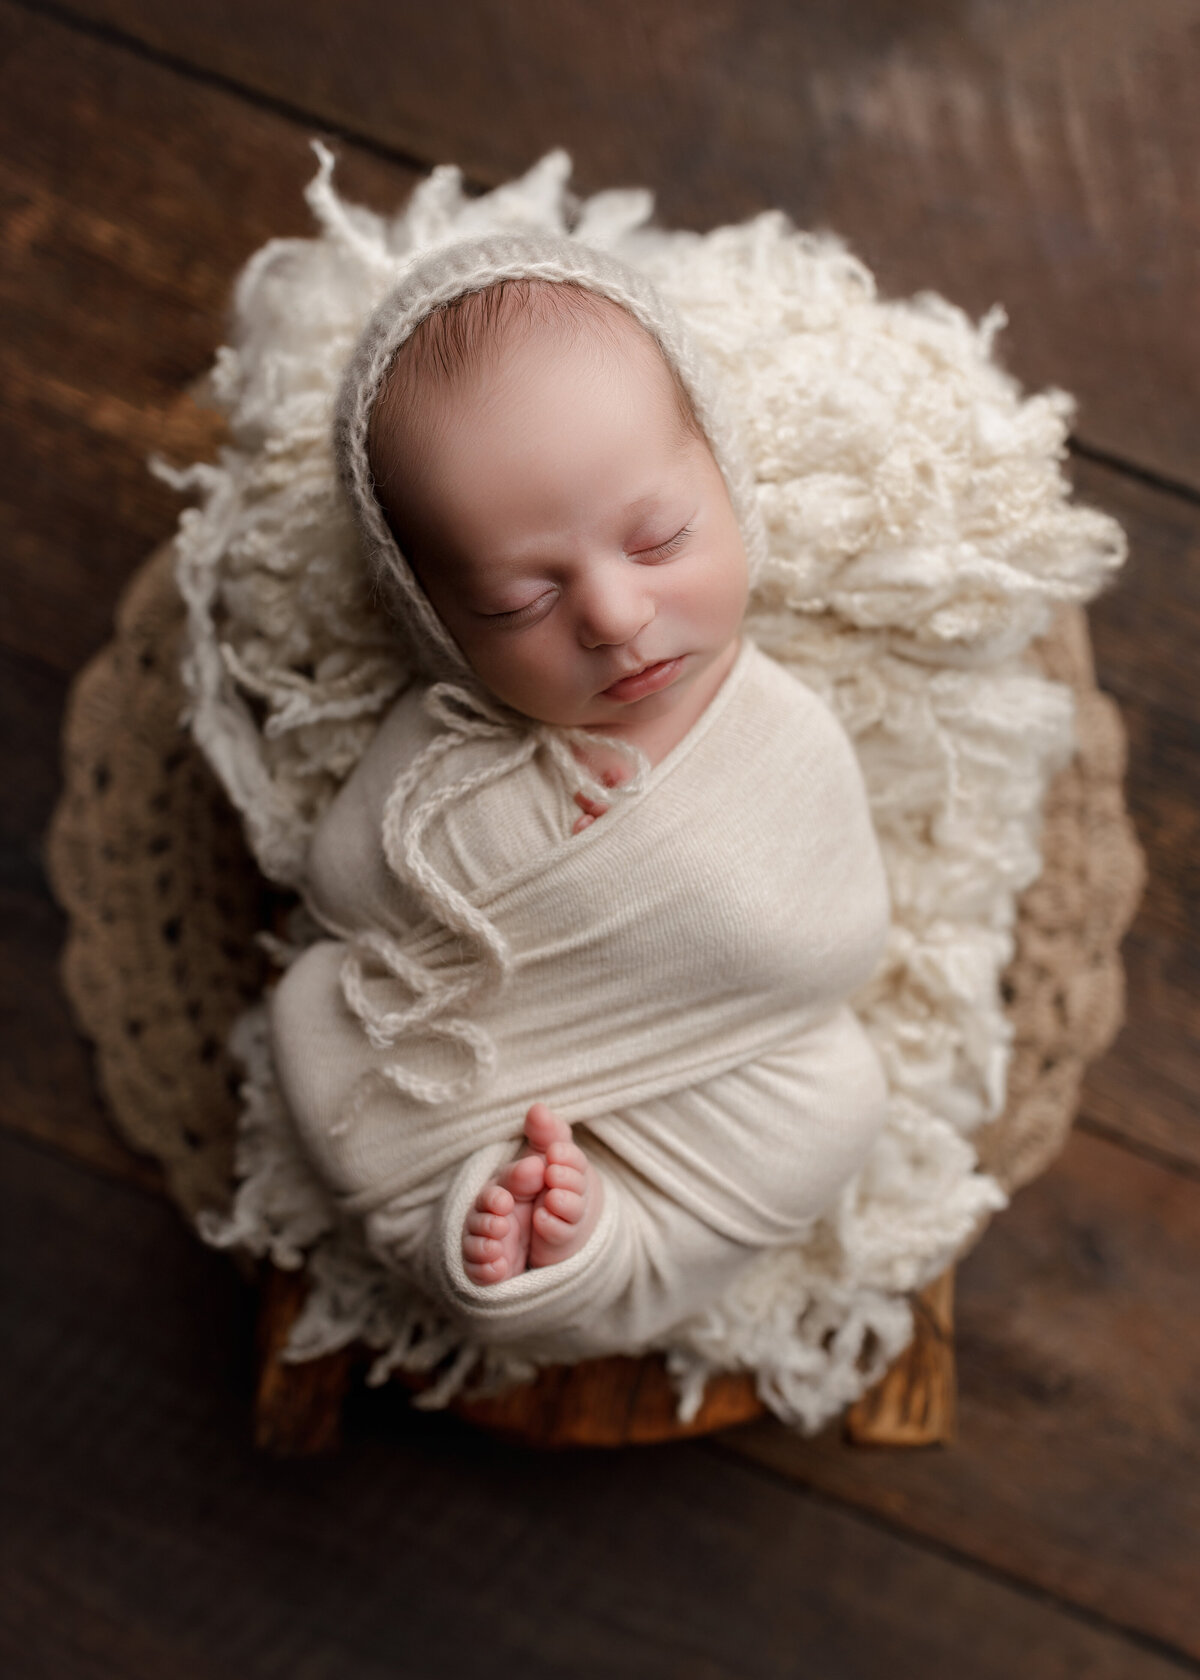 Baby girl newborn photos from West Palm Beach, FL photographer. Baby girl is swaddled in a cream knit wrap with her toes peeking out of the bottom. Baby is sleeping in a basket covered with cream knit. Baby is wearing a knit bonnet. Aerial image.